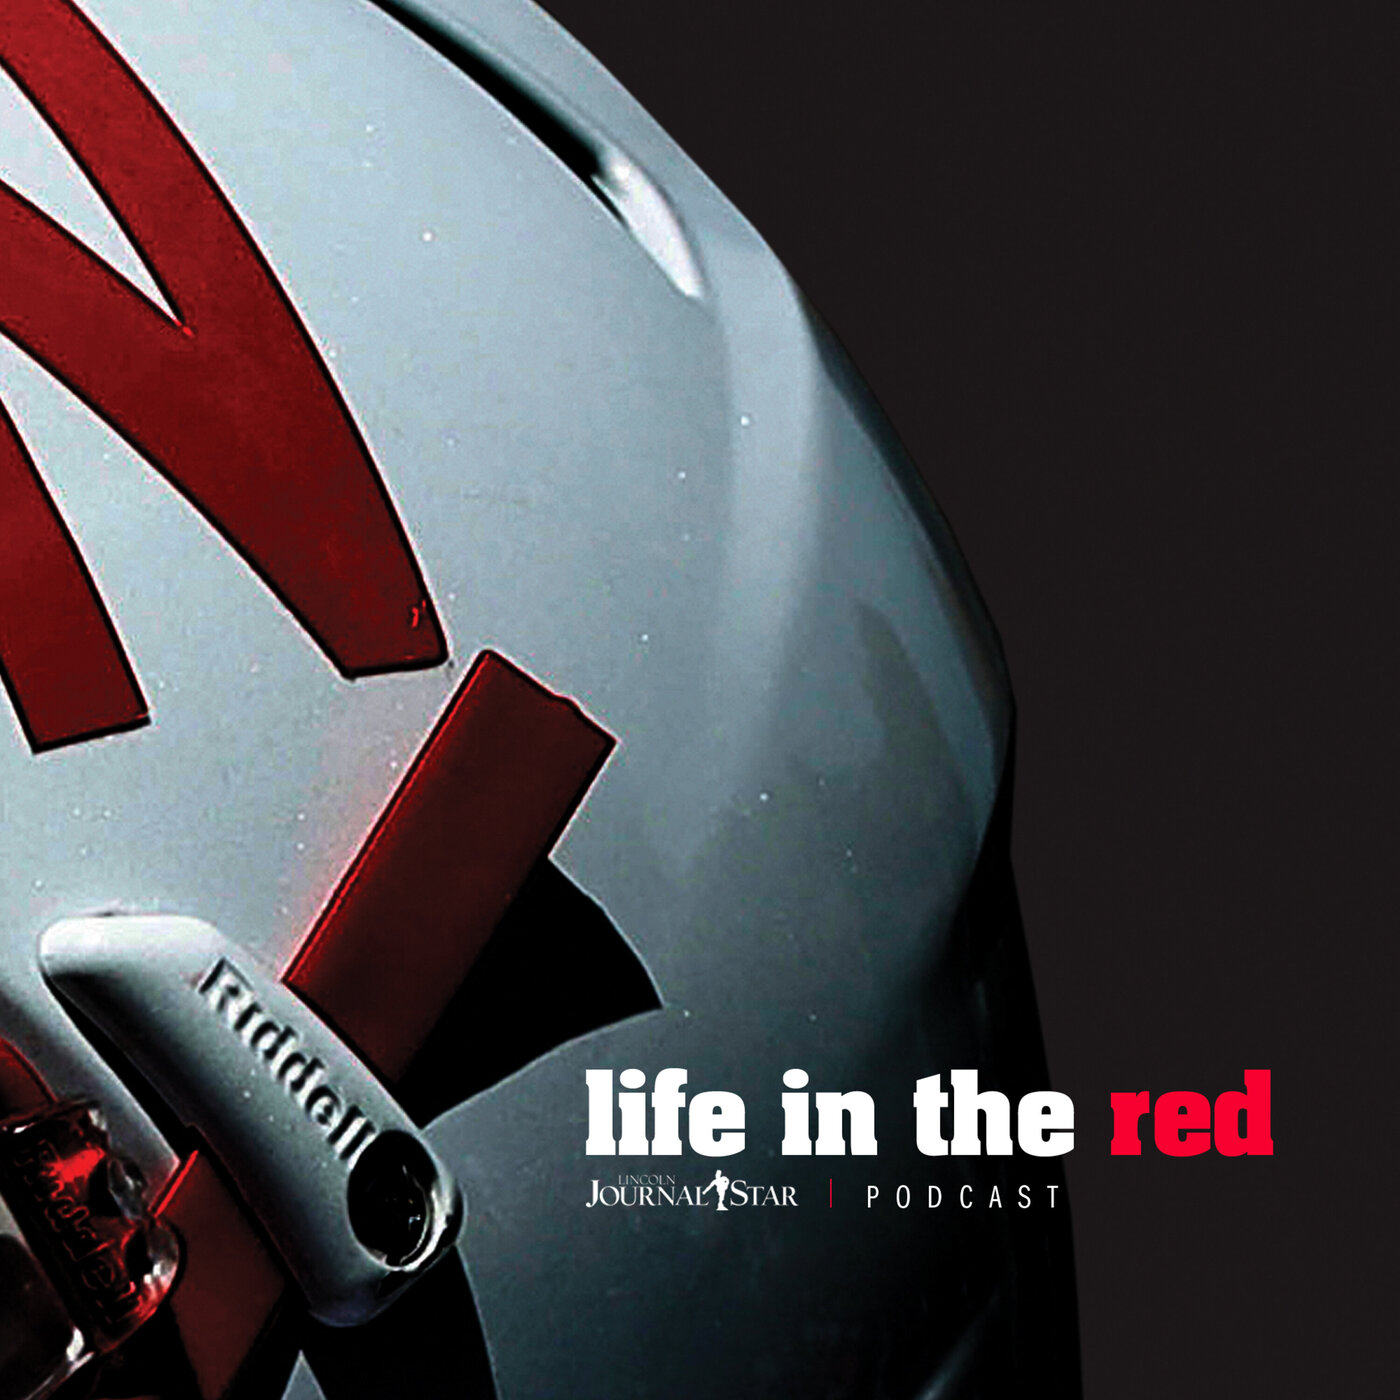 Life in the Red Podcast: What's in store for Nebraska in 2023?